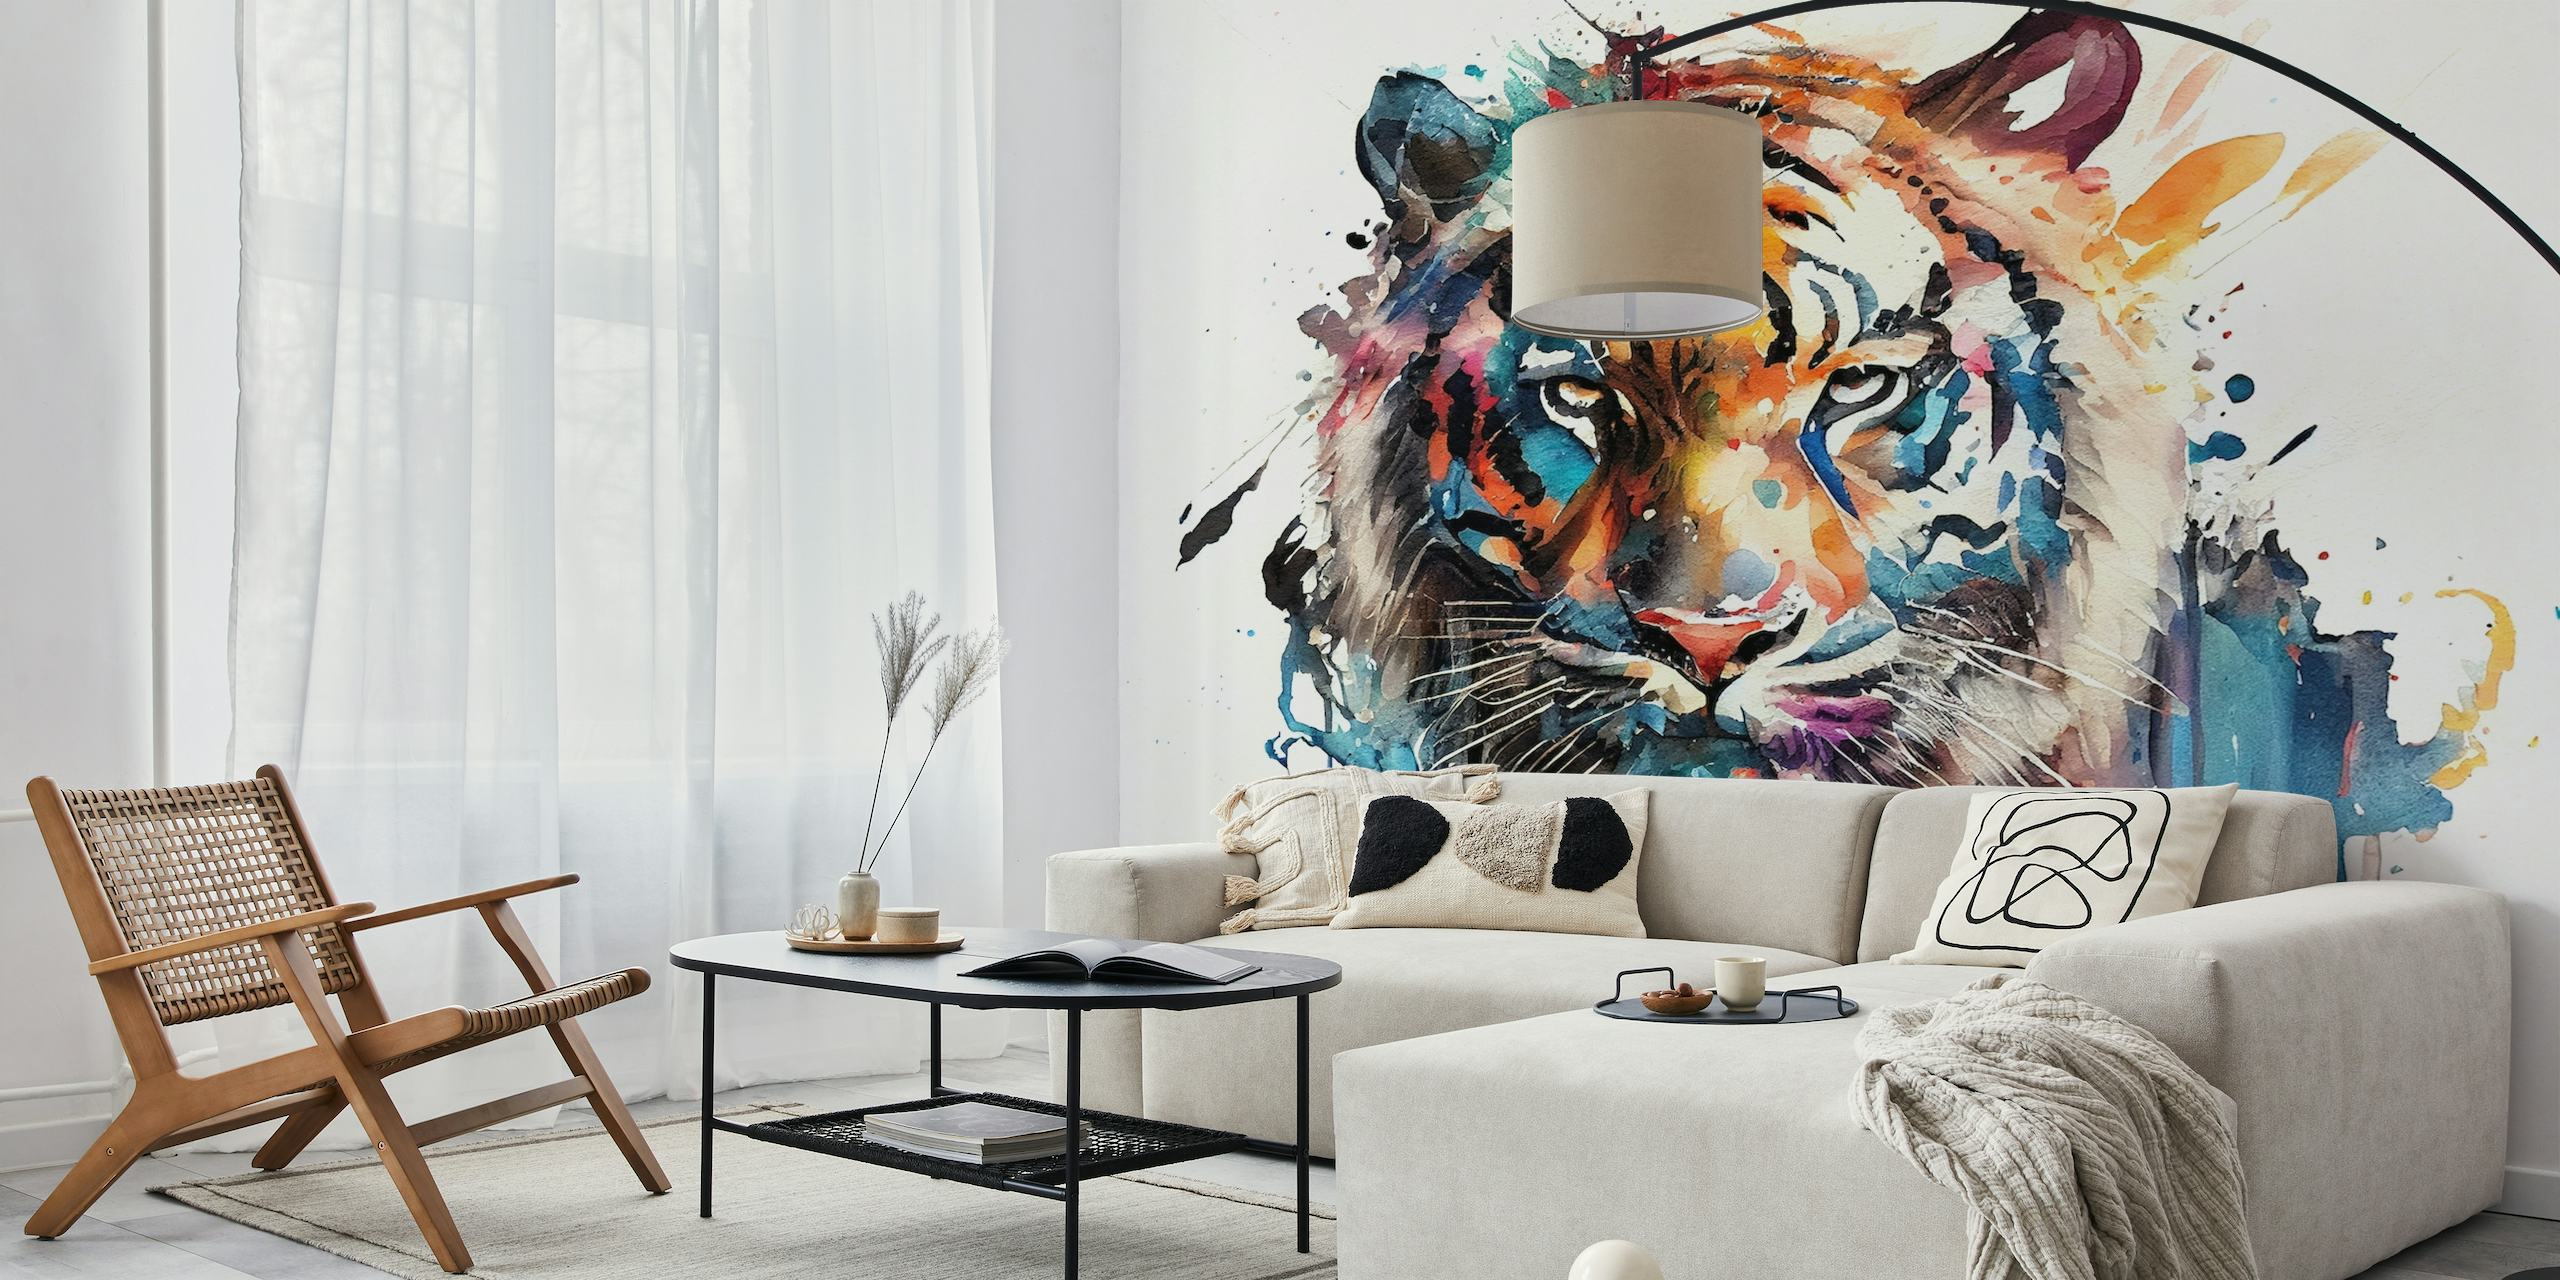 A watercolor painting of a tiger with a mix of vibrant colors against a white background, turned into a wall mural.